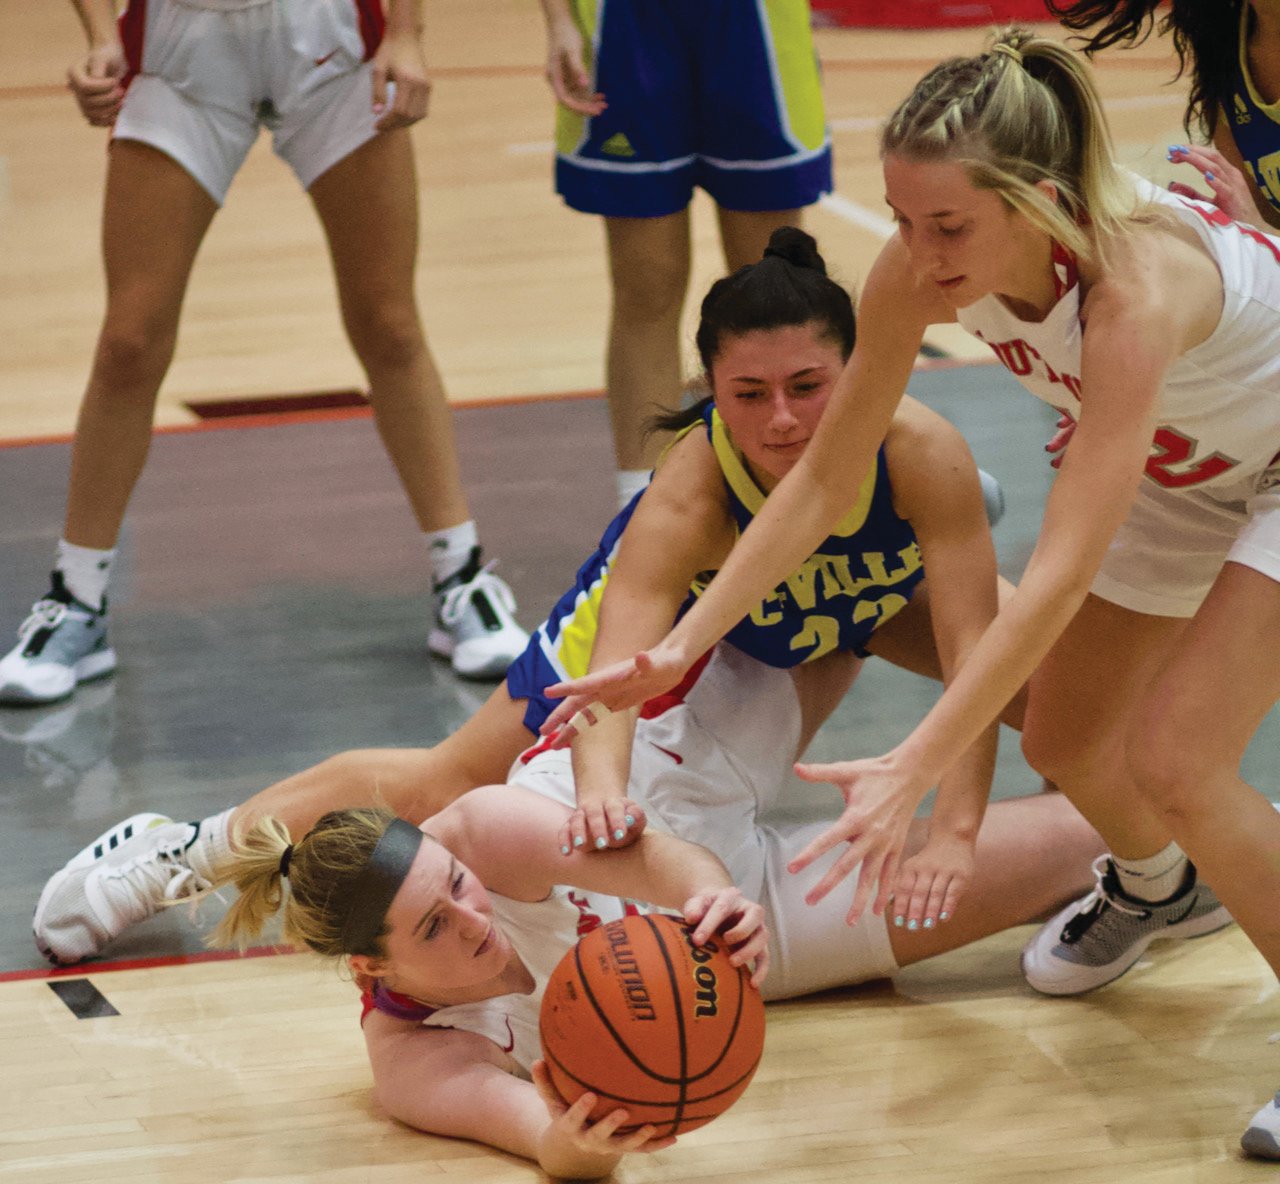 Crawfordsville’s Shea Williamson and Belle Miller fight for a loose ball in a game earlier this season.